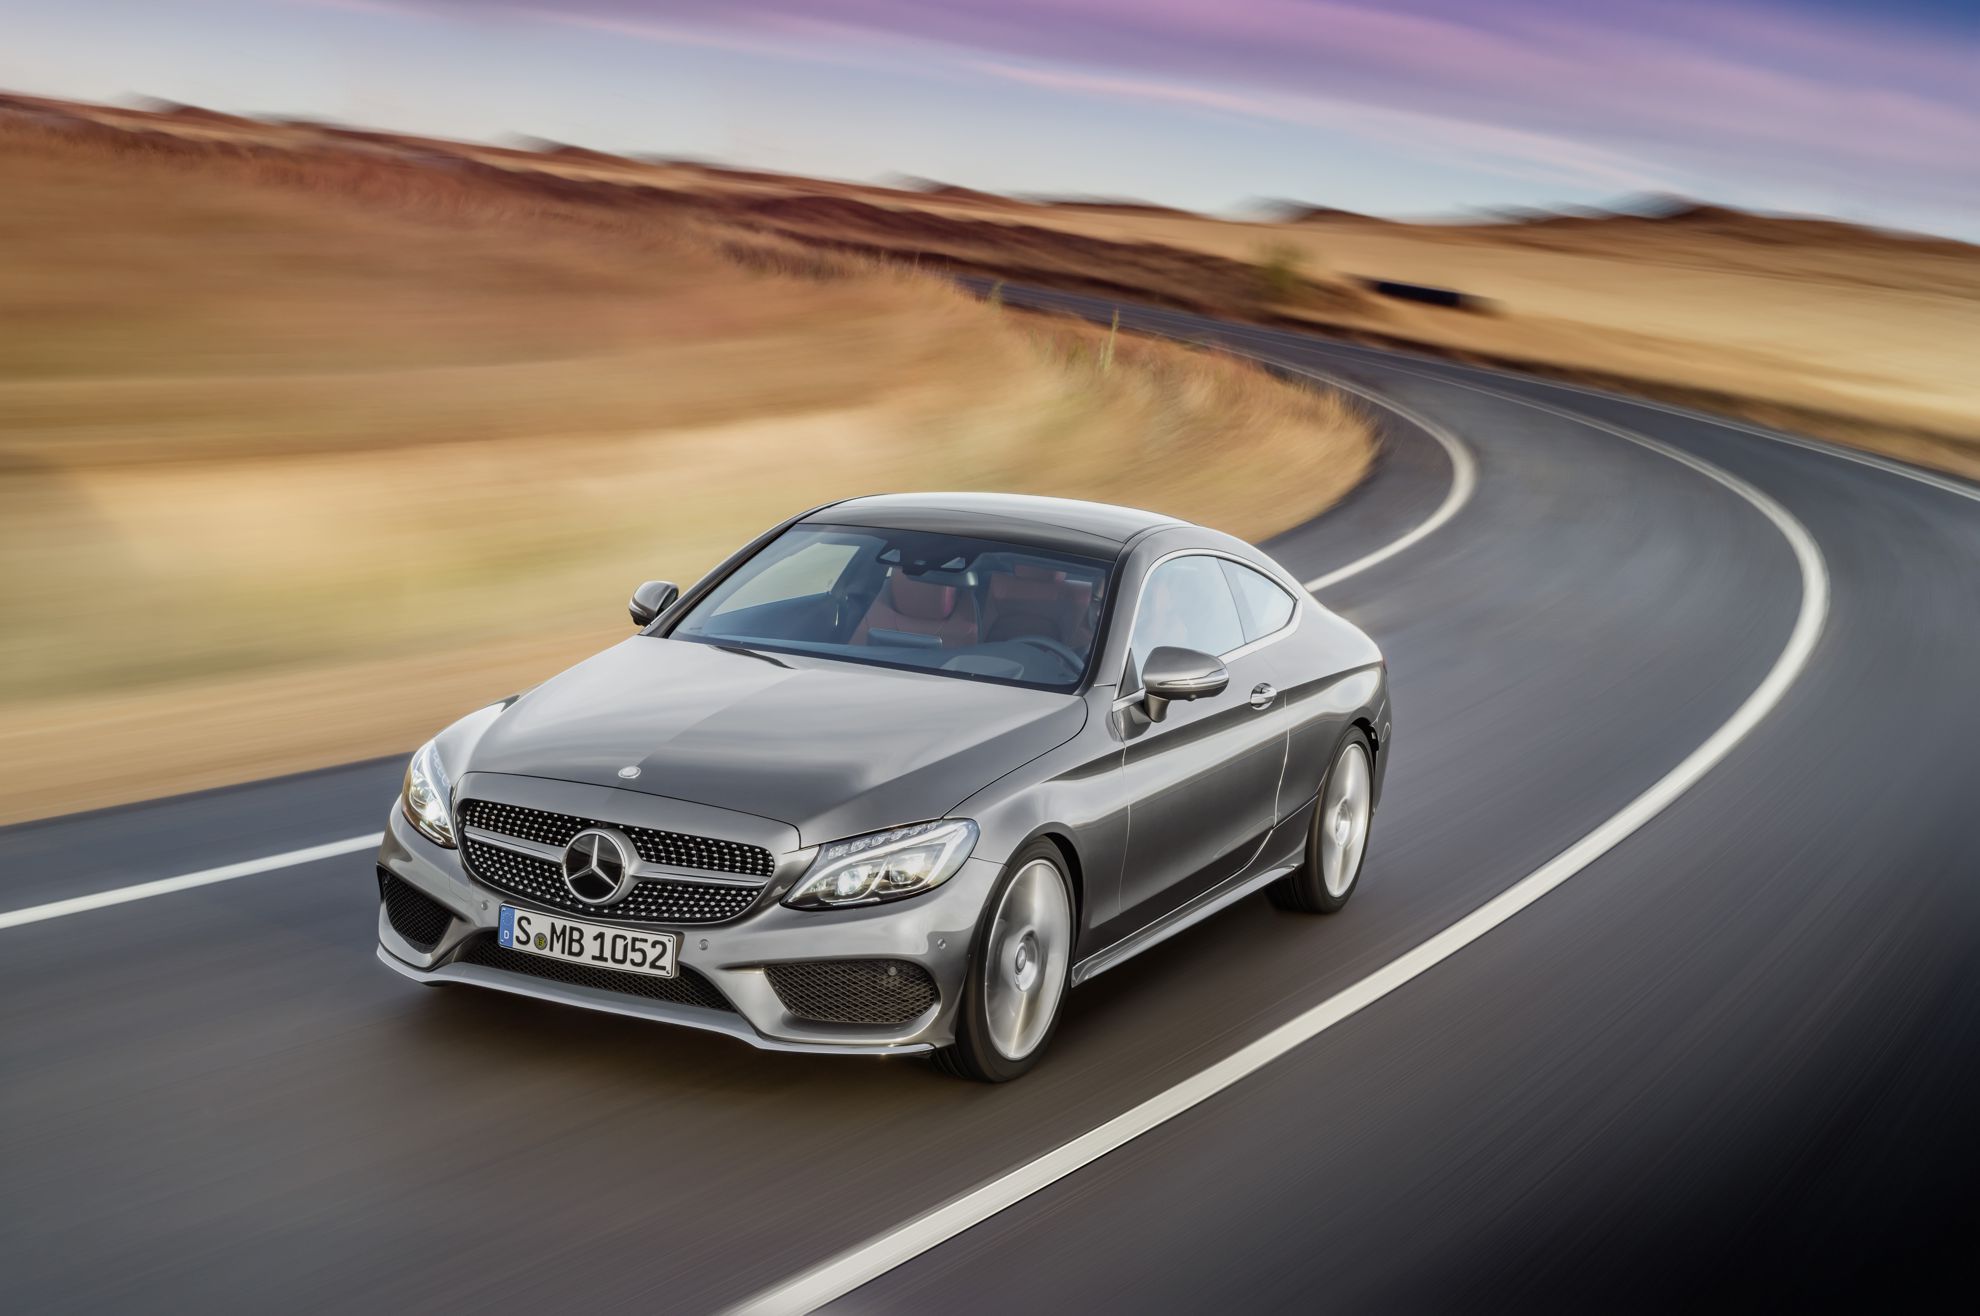 The new Mercedes-Benz C-Class Coupe